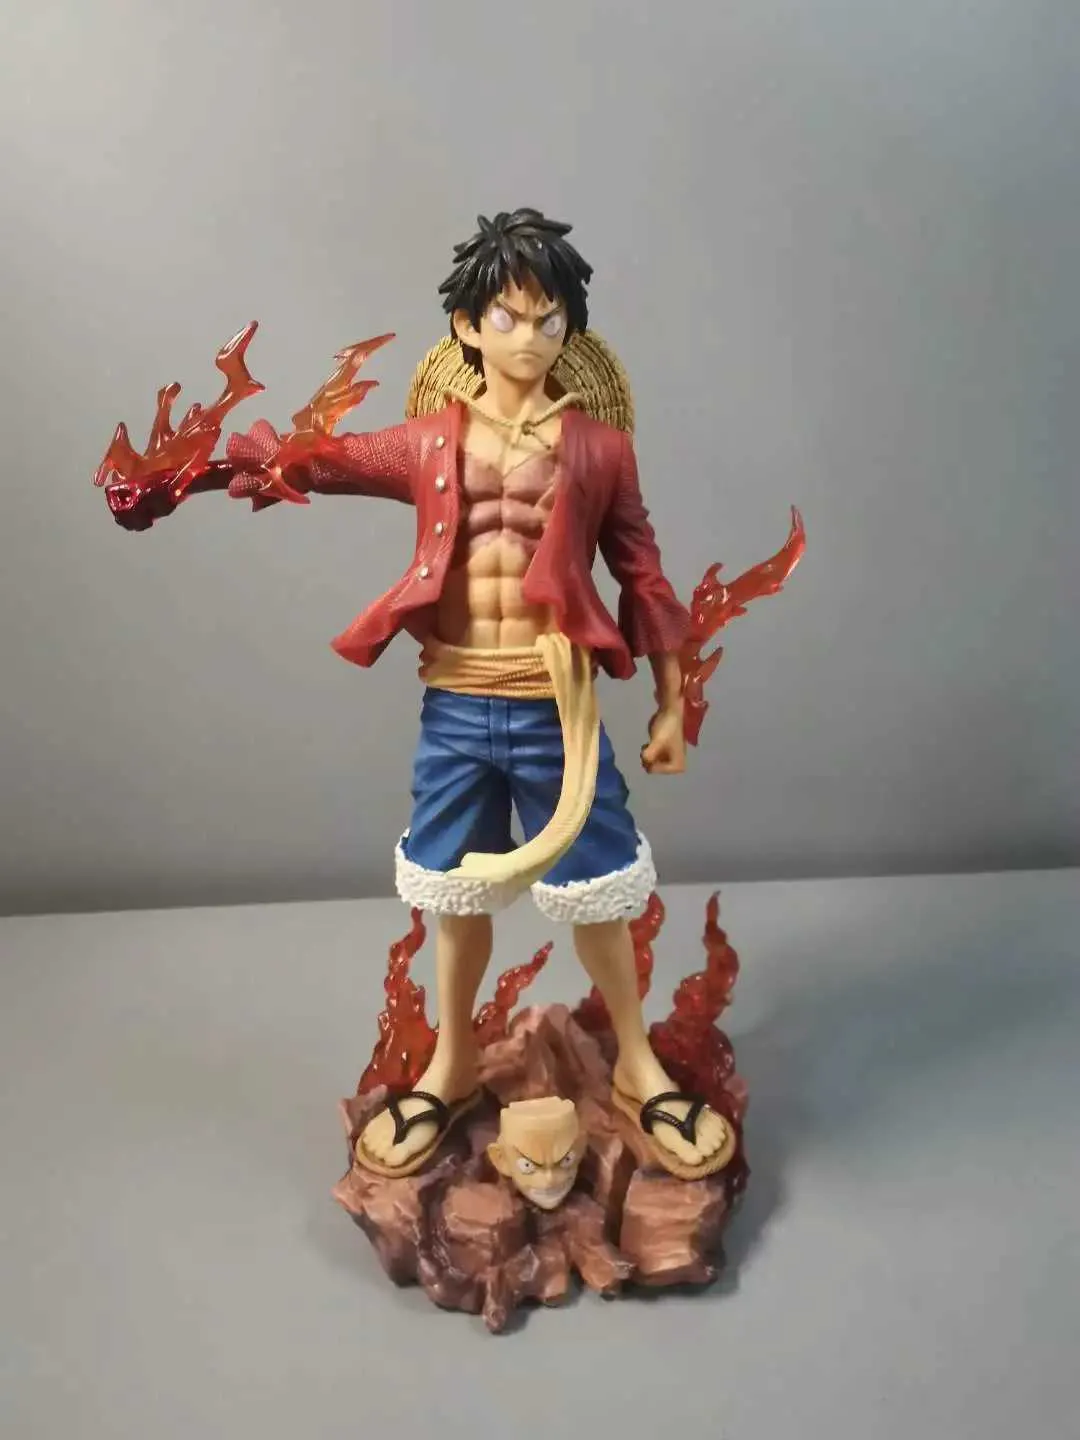 Action Toy Figures One Piece Anime Figure Luffy LX Straw Hat Ny fjärde kejsaren Action Figurer Staty Model Doll Christmas Toys Gift PVC